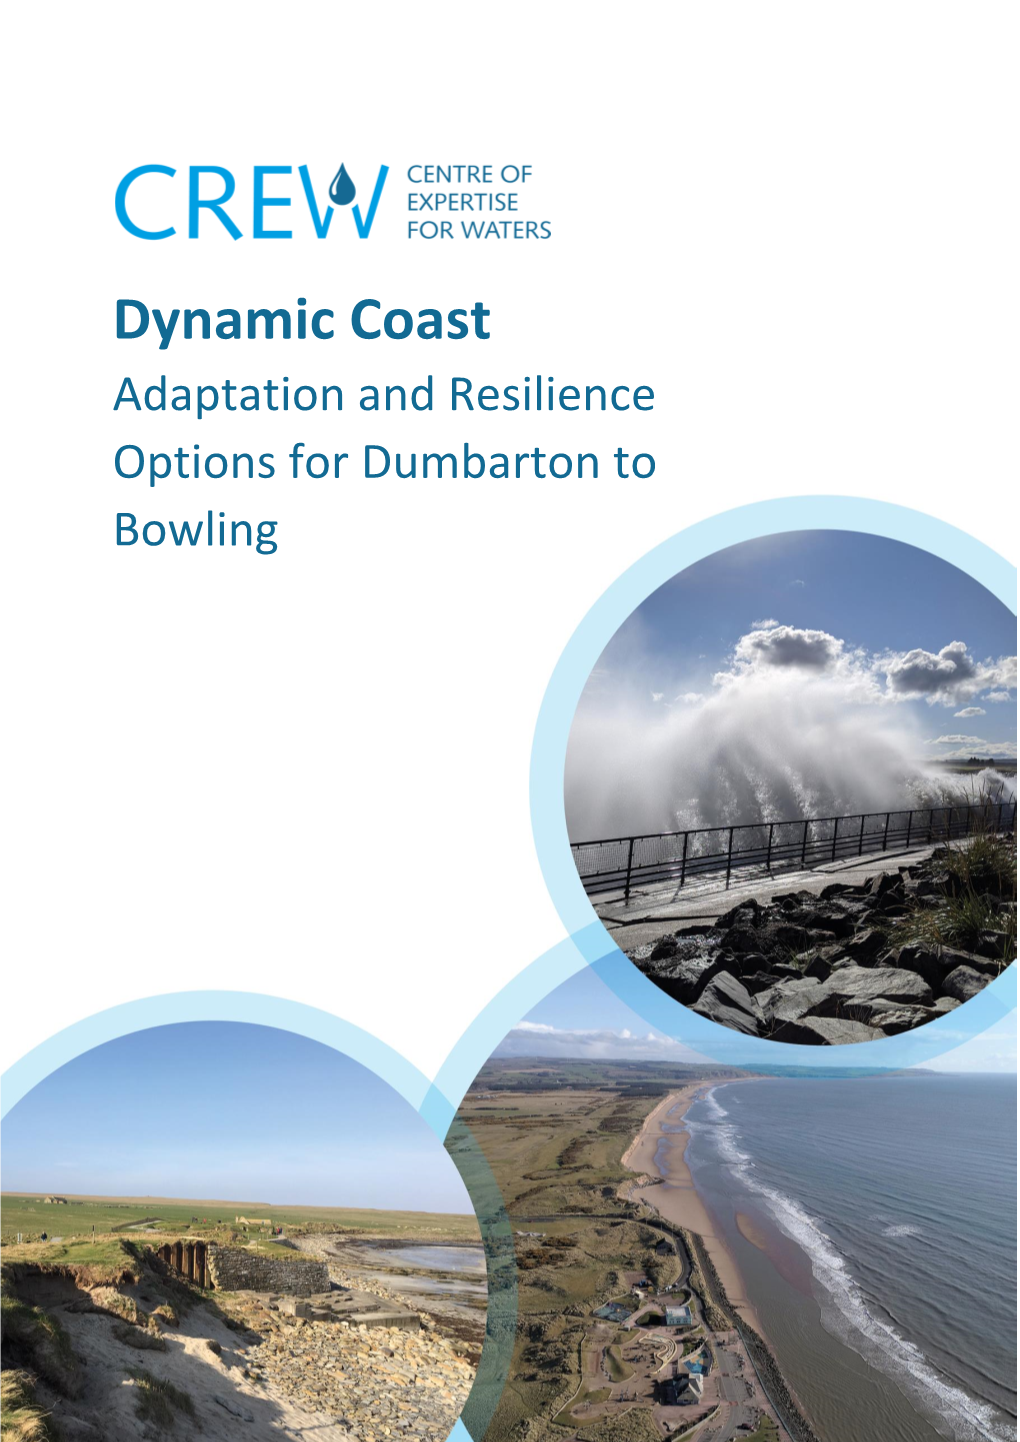 Adaptation and Resilience Options for Dumbarton to Bowling